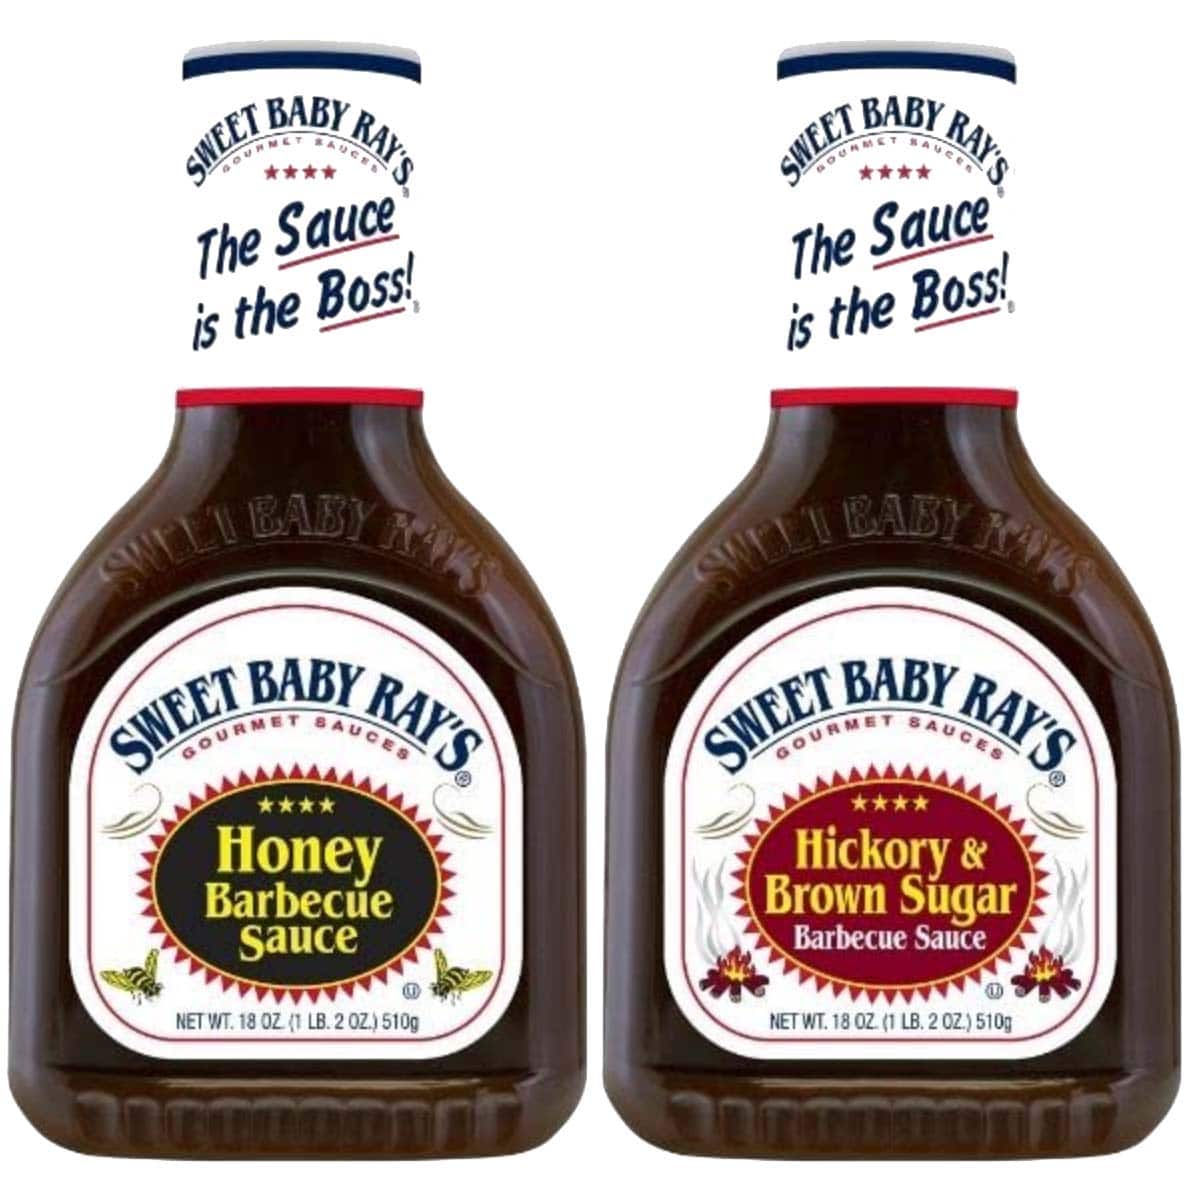 The key similarity between BBQ sauce and Bulgogi sauce is the smokey flavor. They both have a deep rich flavor that comes from the caramelization of the sugars.